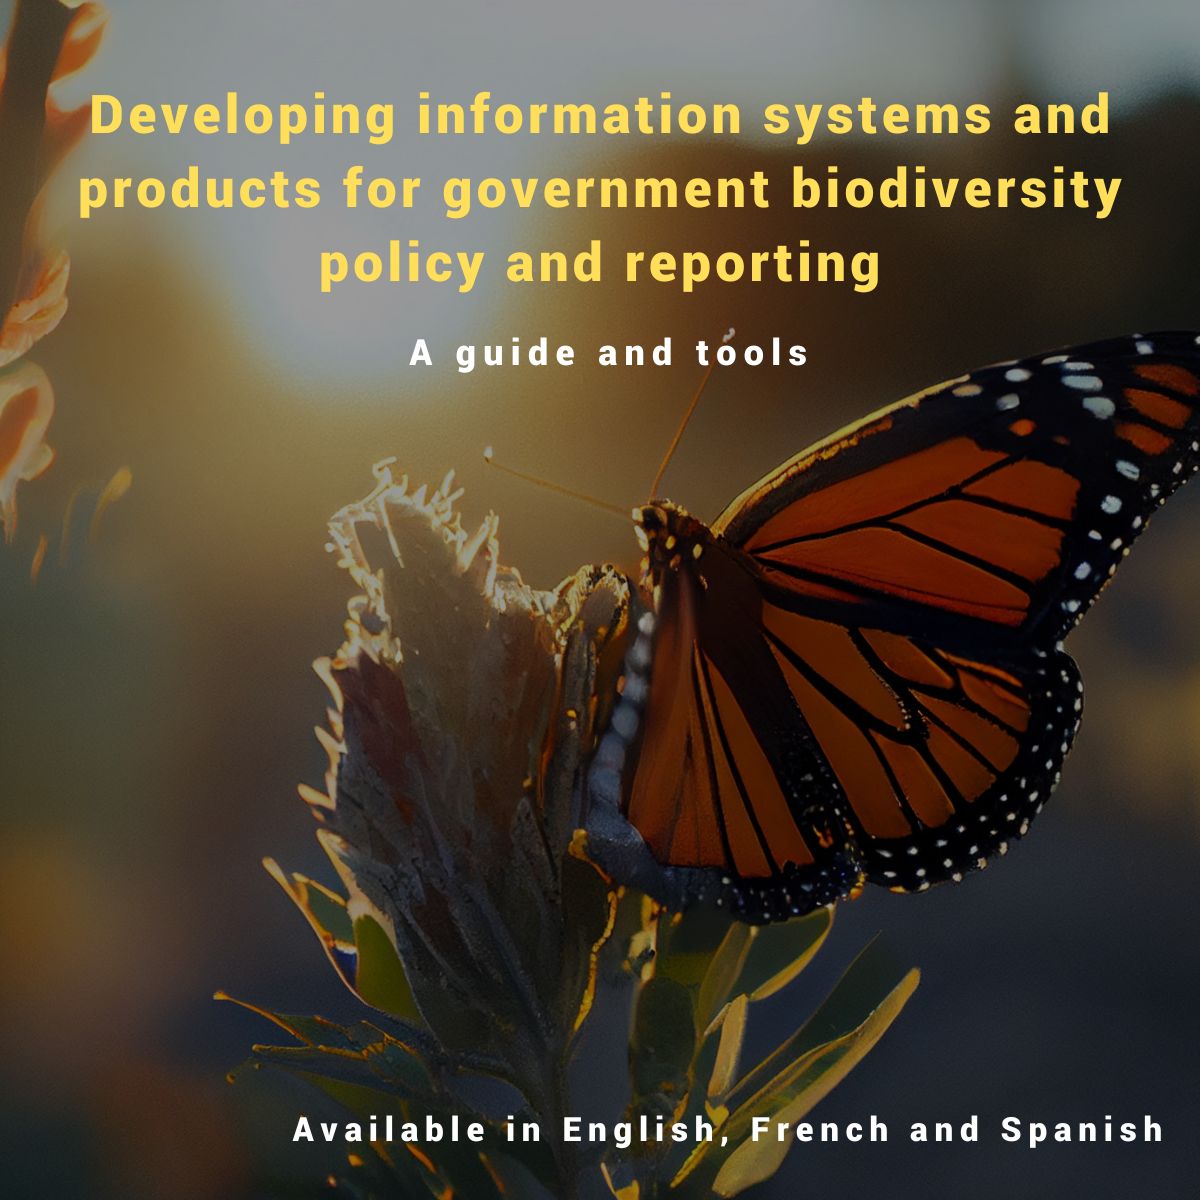 Government staff can develop systems that organize how biodiversity information is produced and made available for effective decision-making with UNEP-WCMC’s latest suite of information systems guide and tools: eu1.hubs.ly/H08Hn-n0